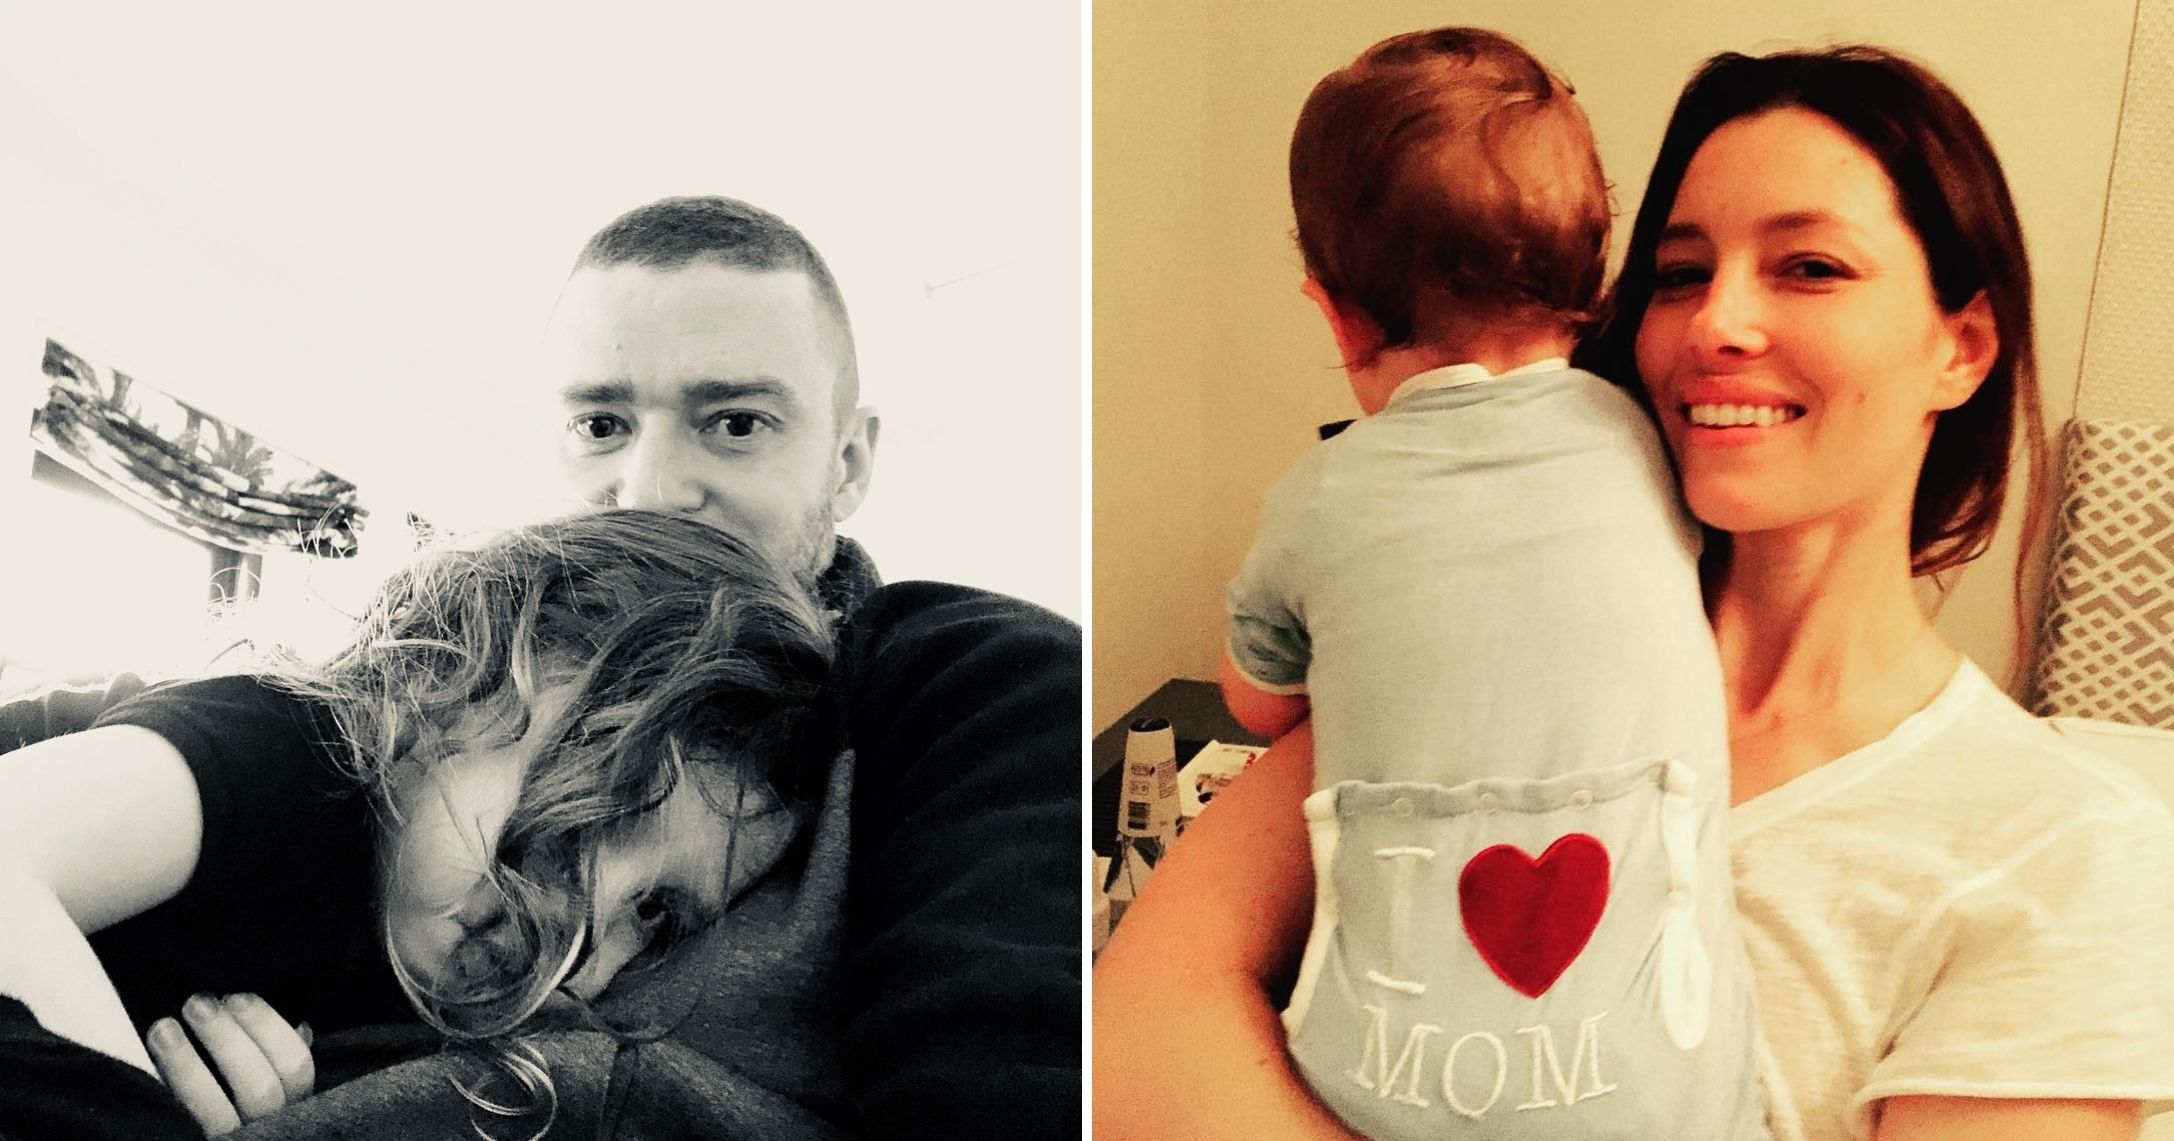 Jessica Biel and Justin Timberlake Share Rare Photos of Sons Silas and  Phineas on Father's Day: 'My Greatest Gifts!